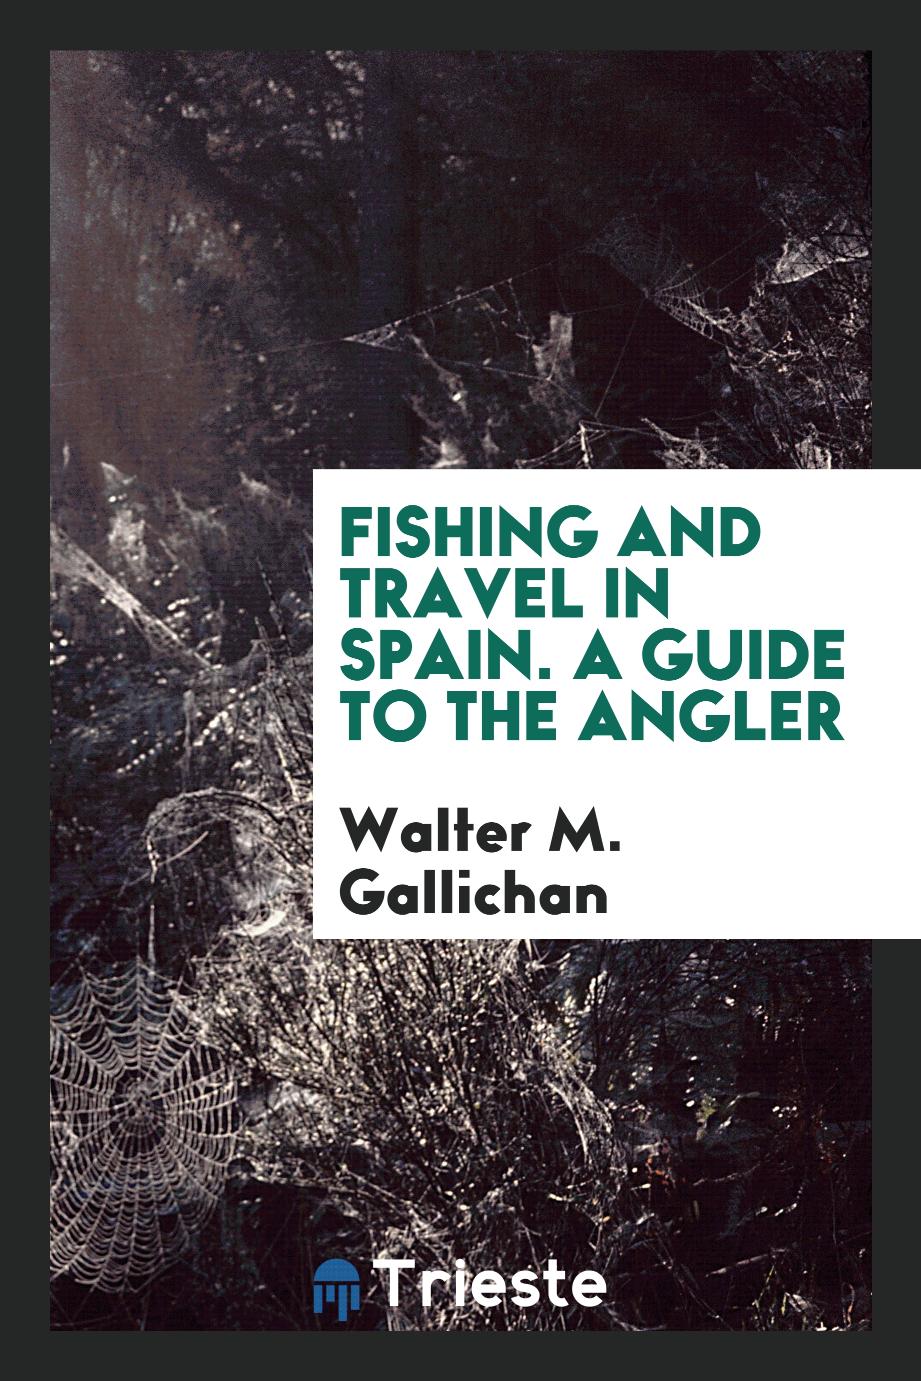 Fishing and travel in Spain. A guide to the Angler